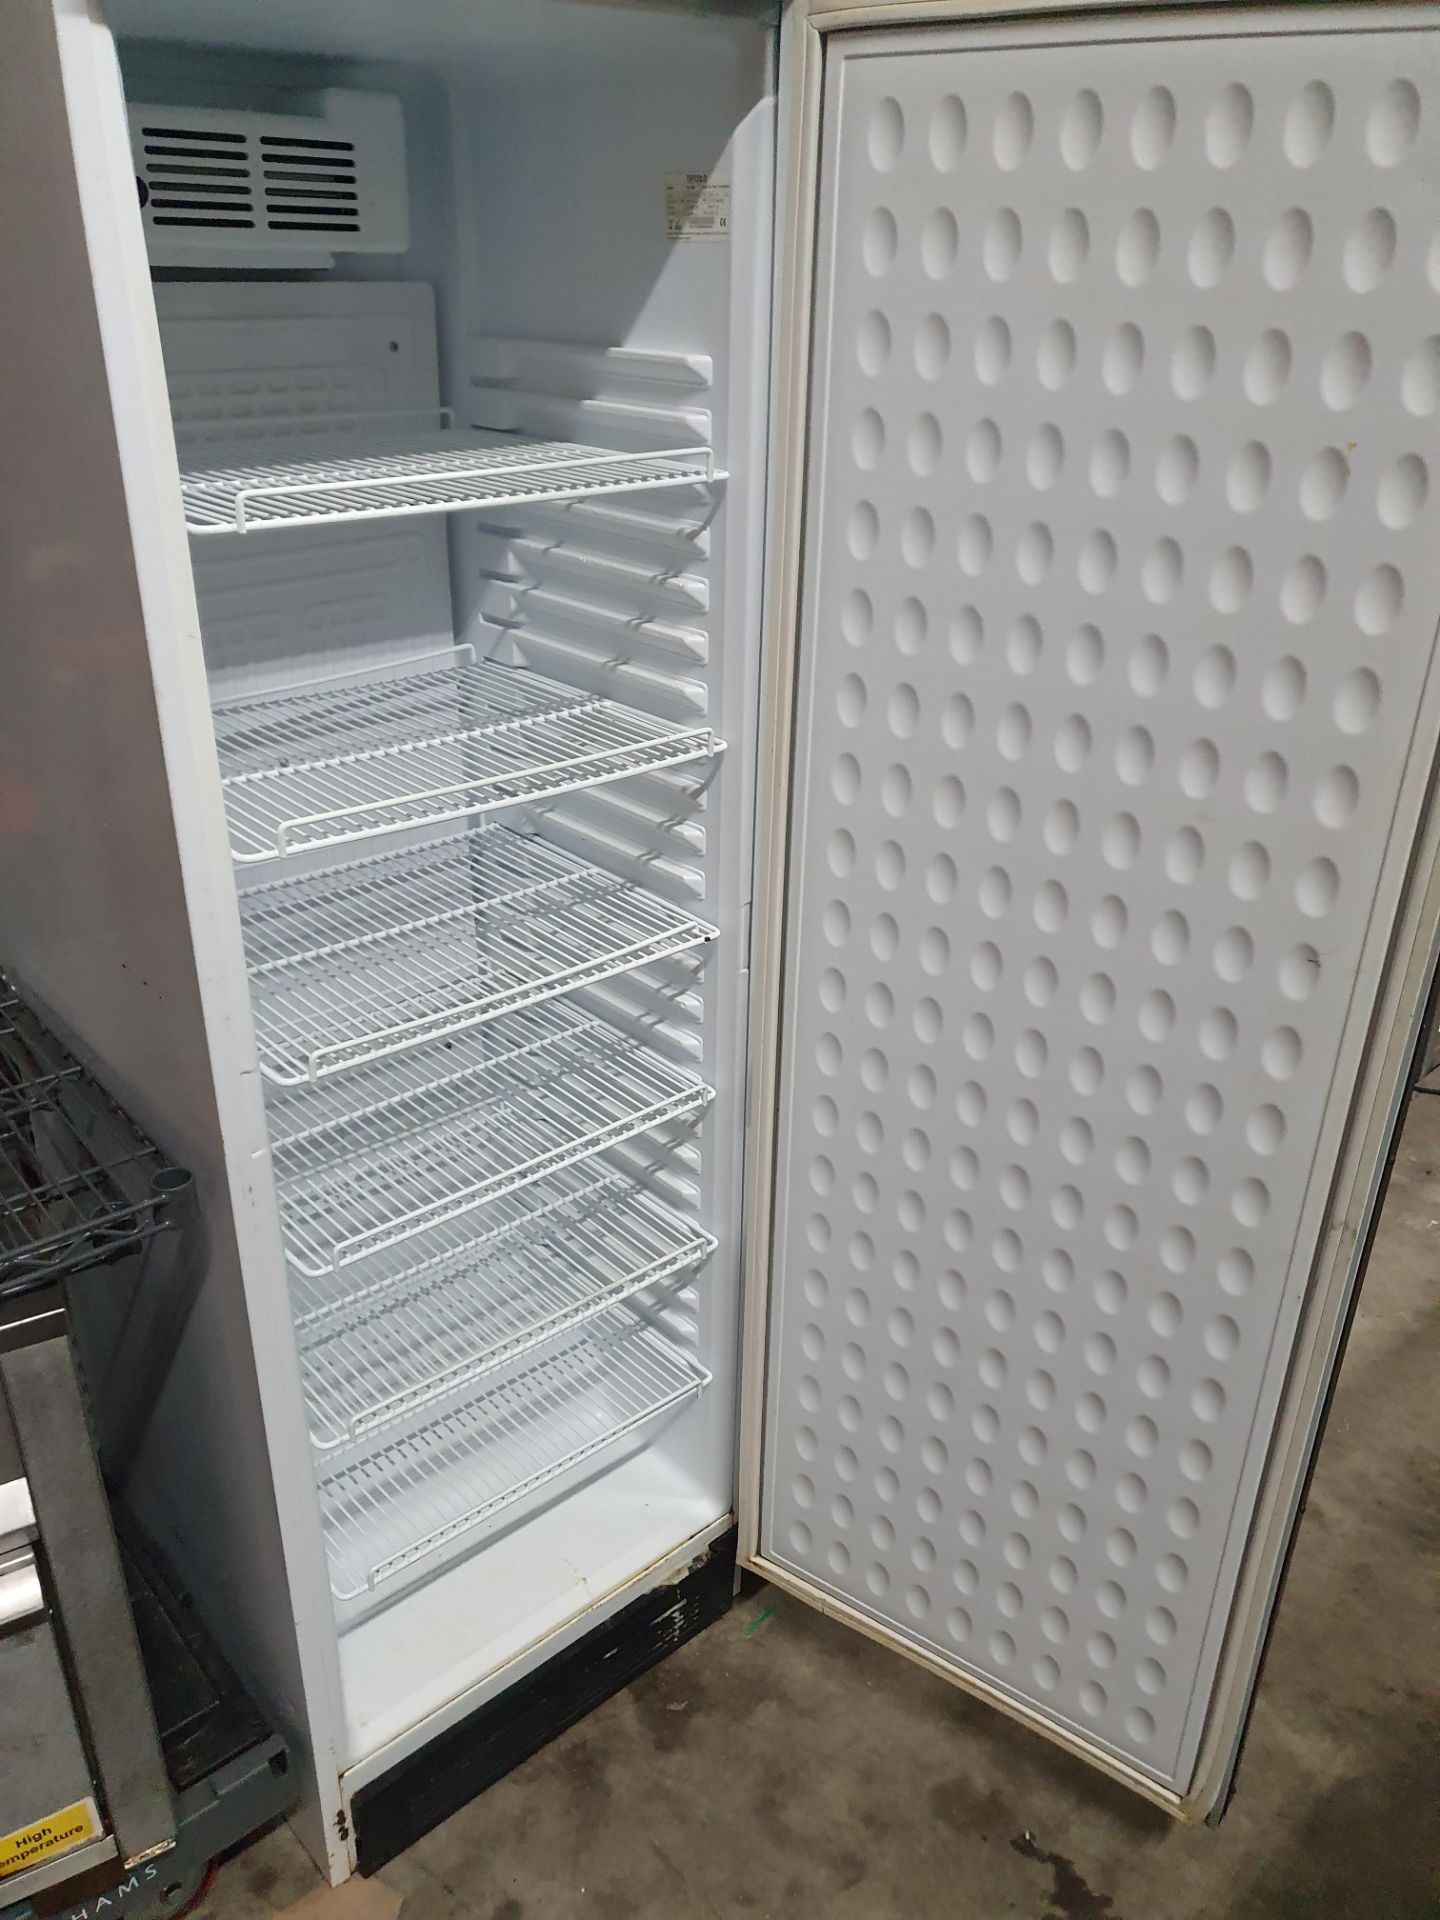 Tefcold Lightweight Commercial Fridge - Image 2 of 3